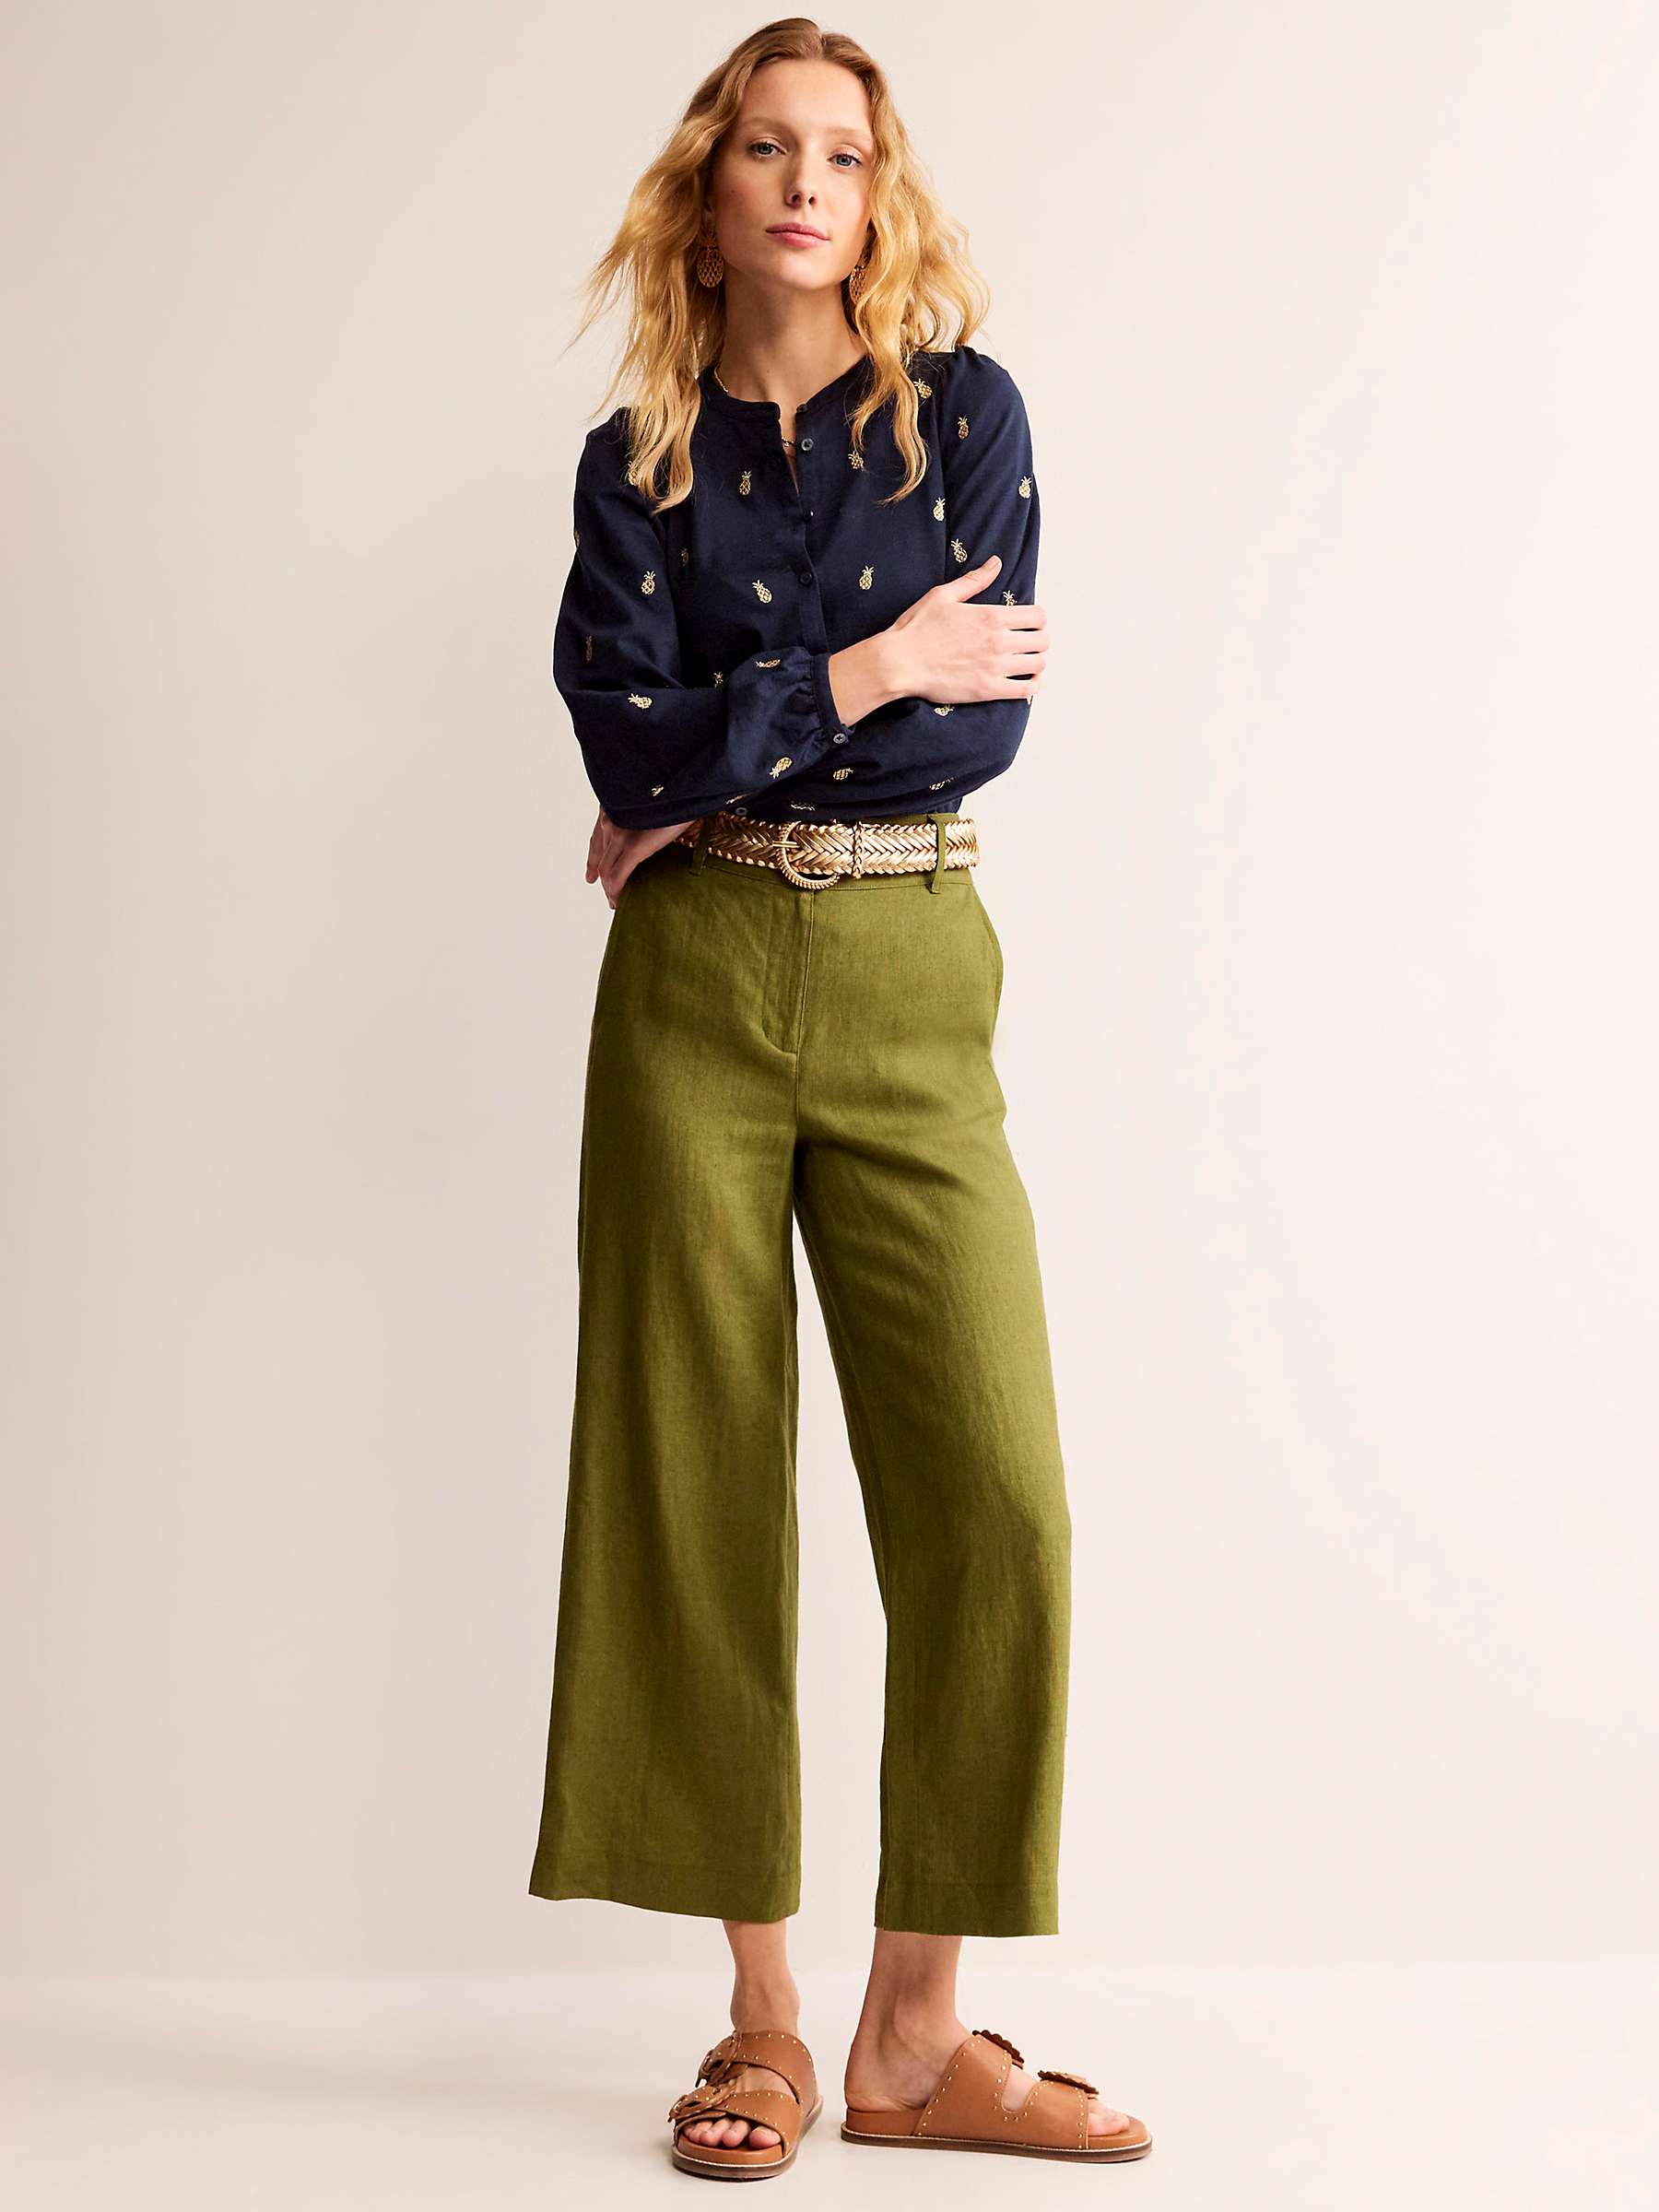 Buy Boden Marina Pineapple Embroidery Cotton Blouse, Navy Online at johnlewis.com